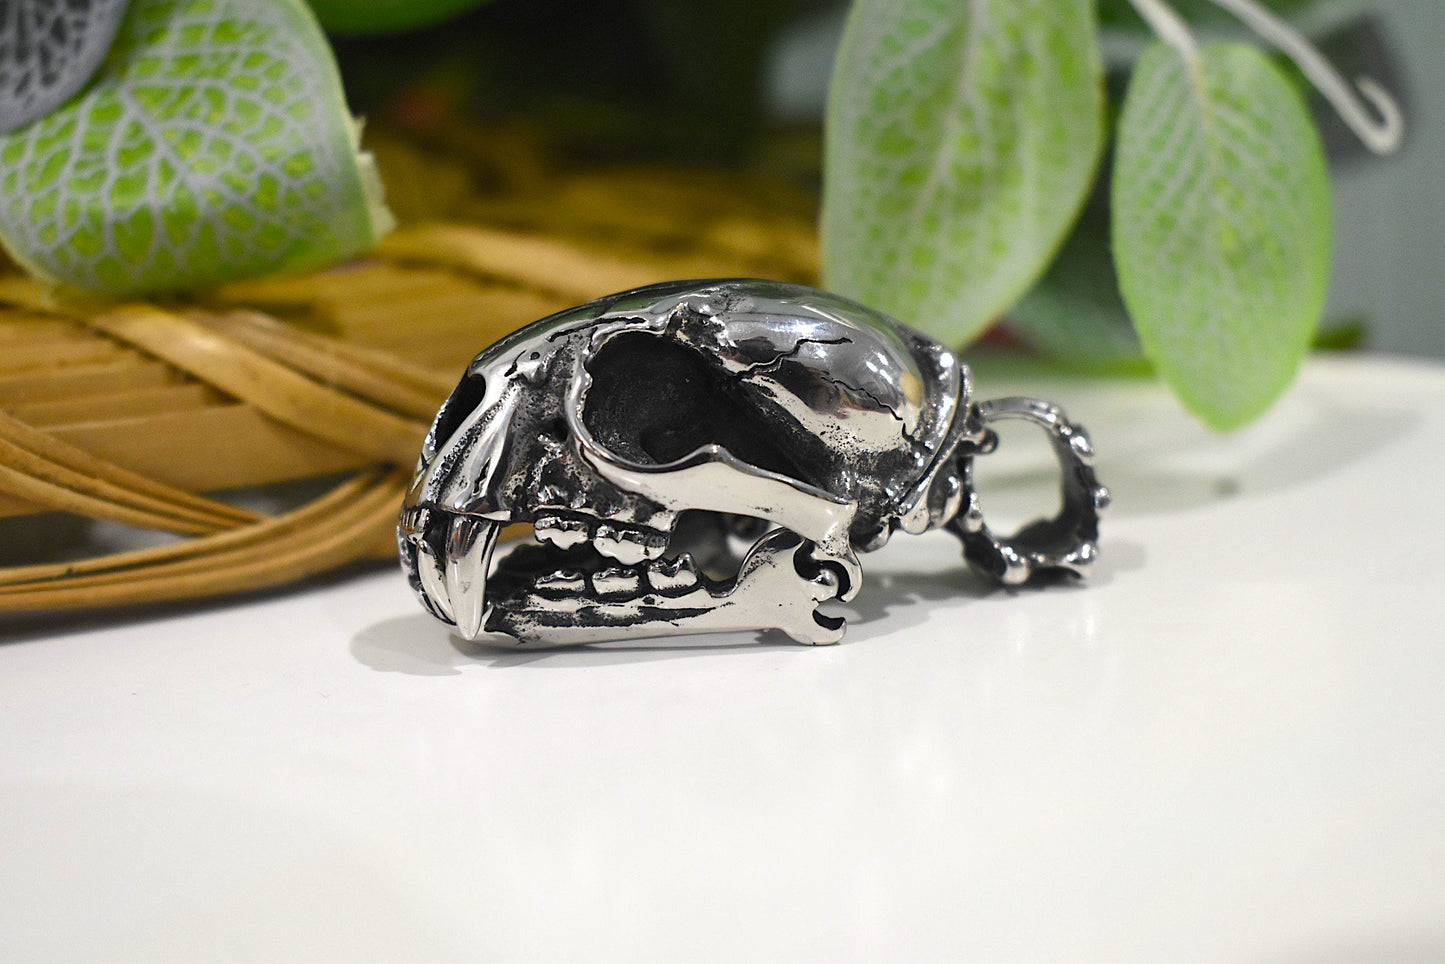 Gothic Skeleton Dinosaur Head Sterling Silver Stainless Steel Pendant Necklace